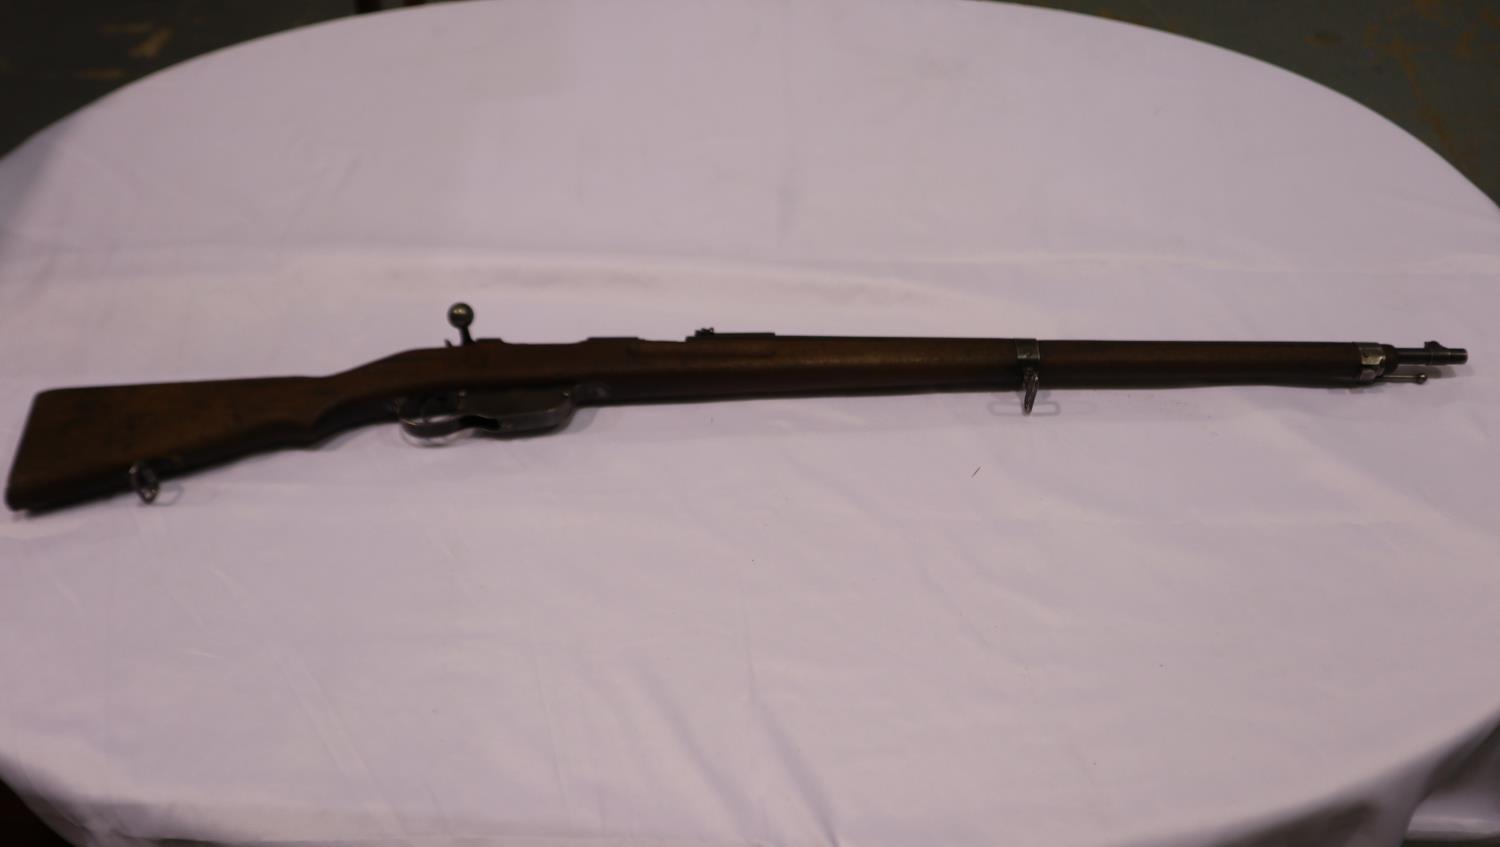 Steyr Mannlicher M95 straight pull service rifle, numbered 9953, deactivated to current EU